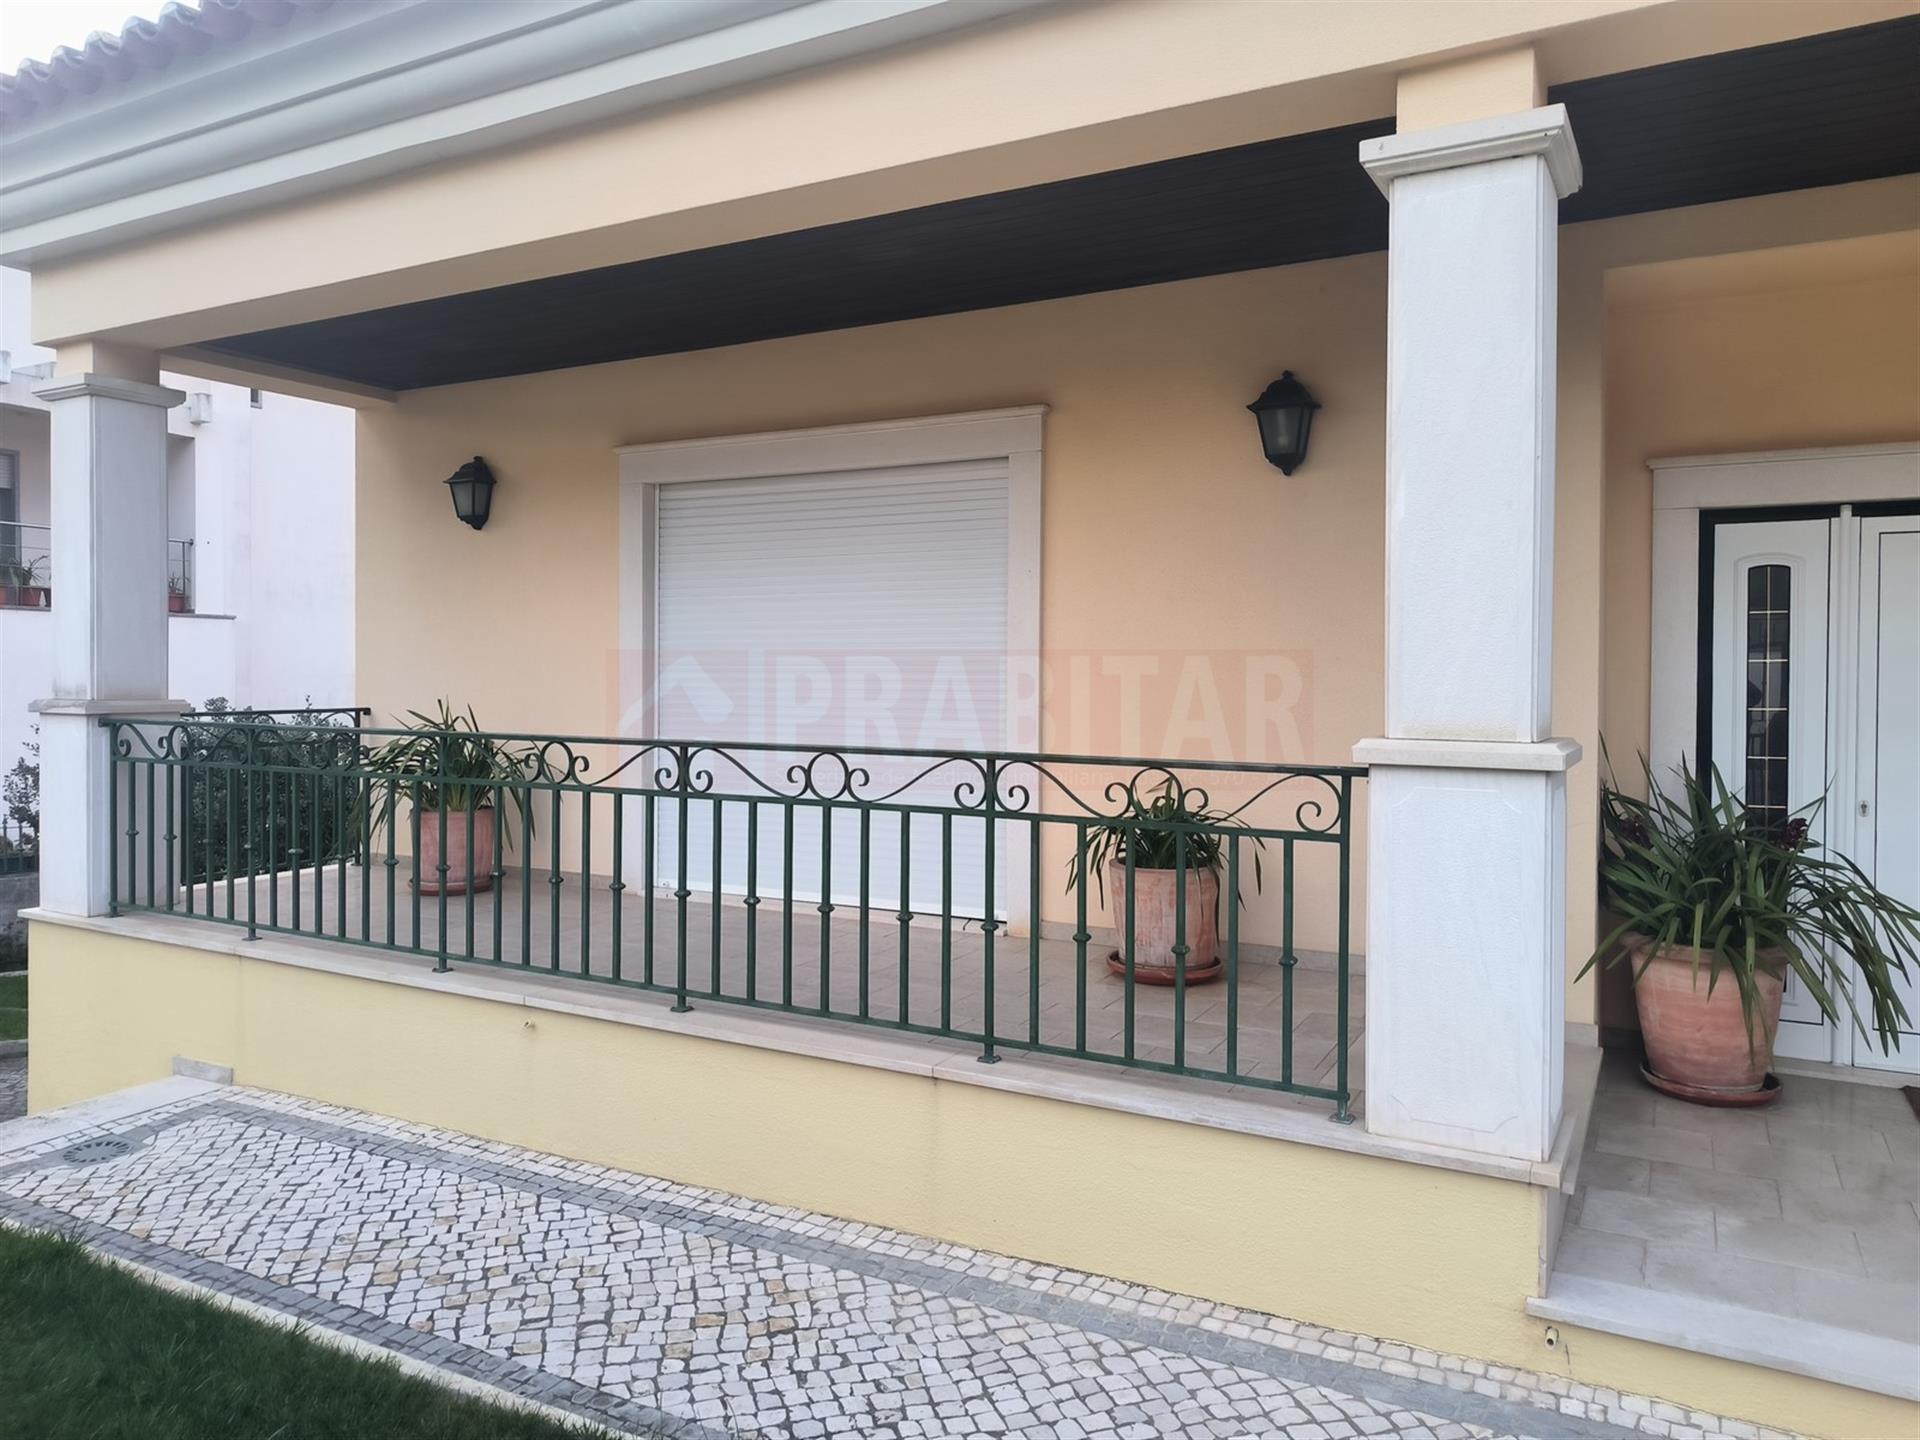 Detached villa with patio, swimming pool and garden 10 minutes from Coimbra.